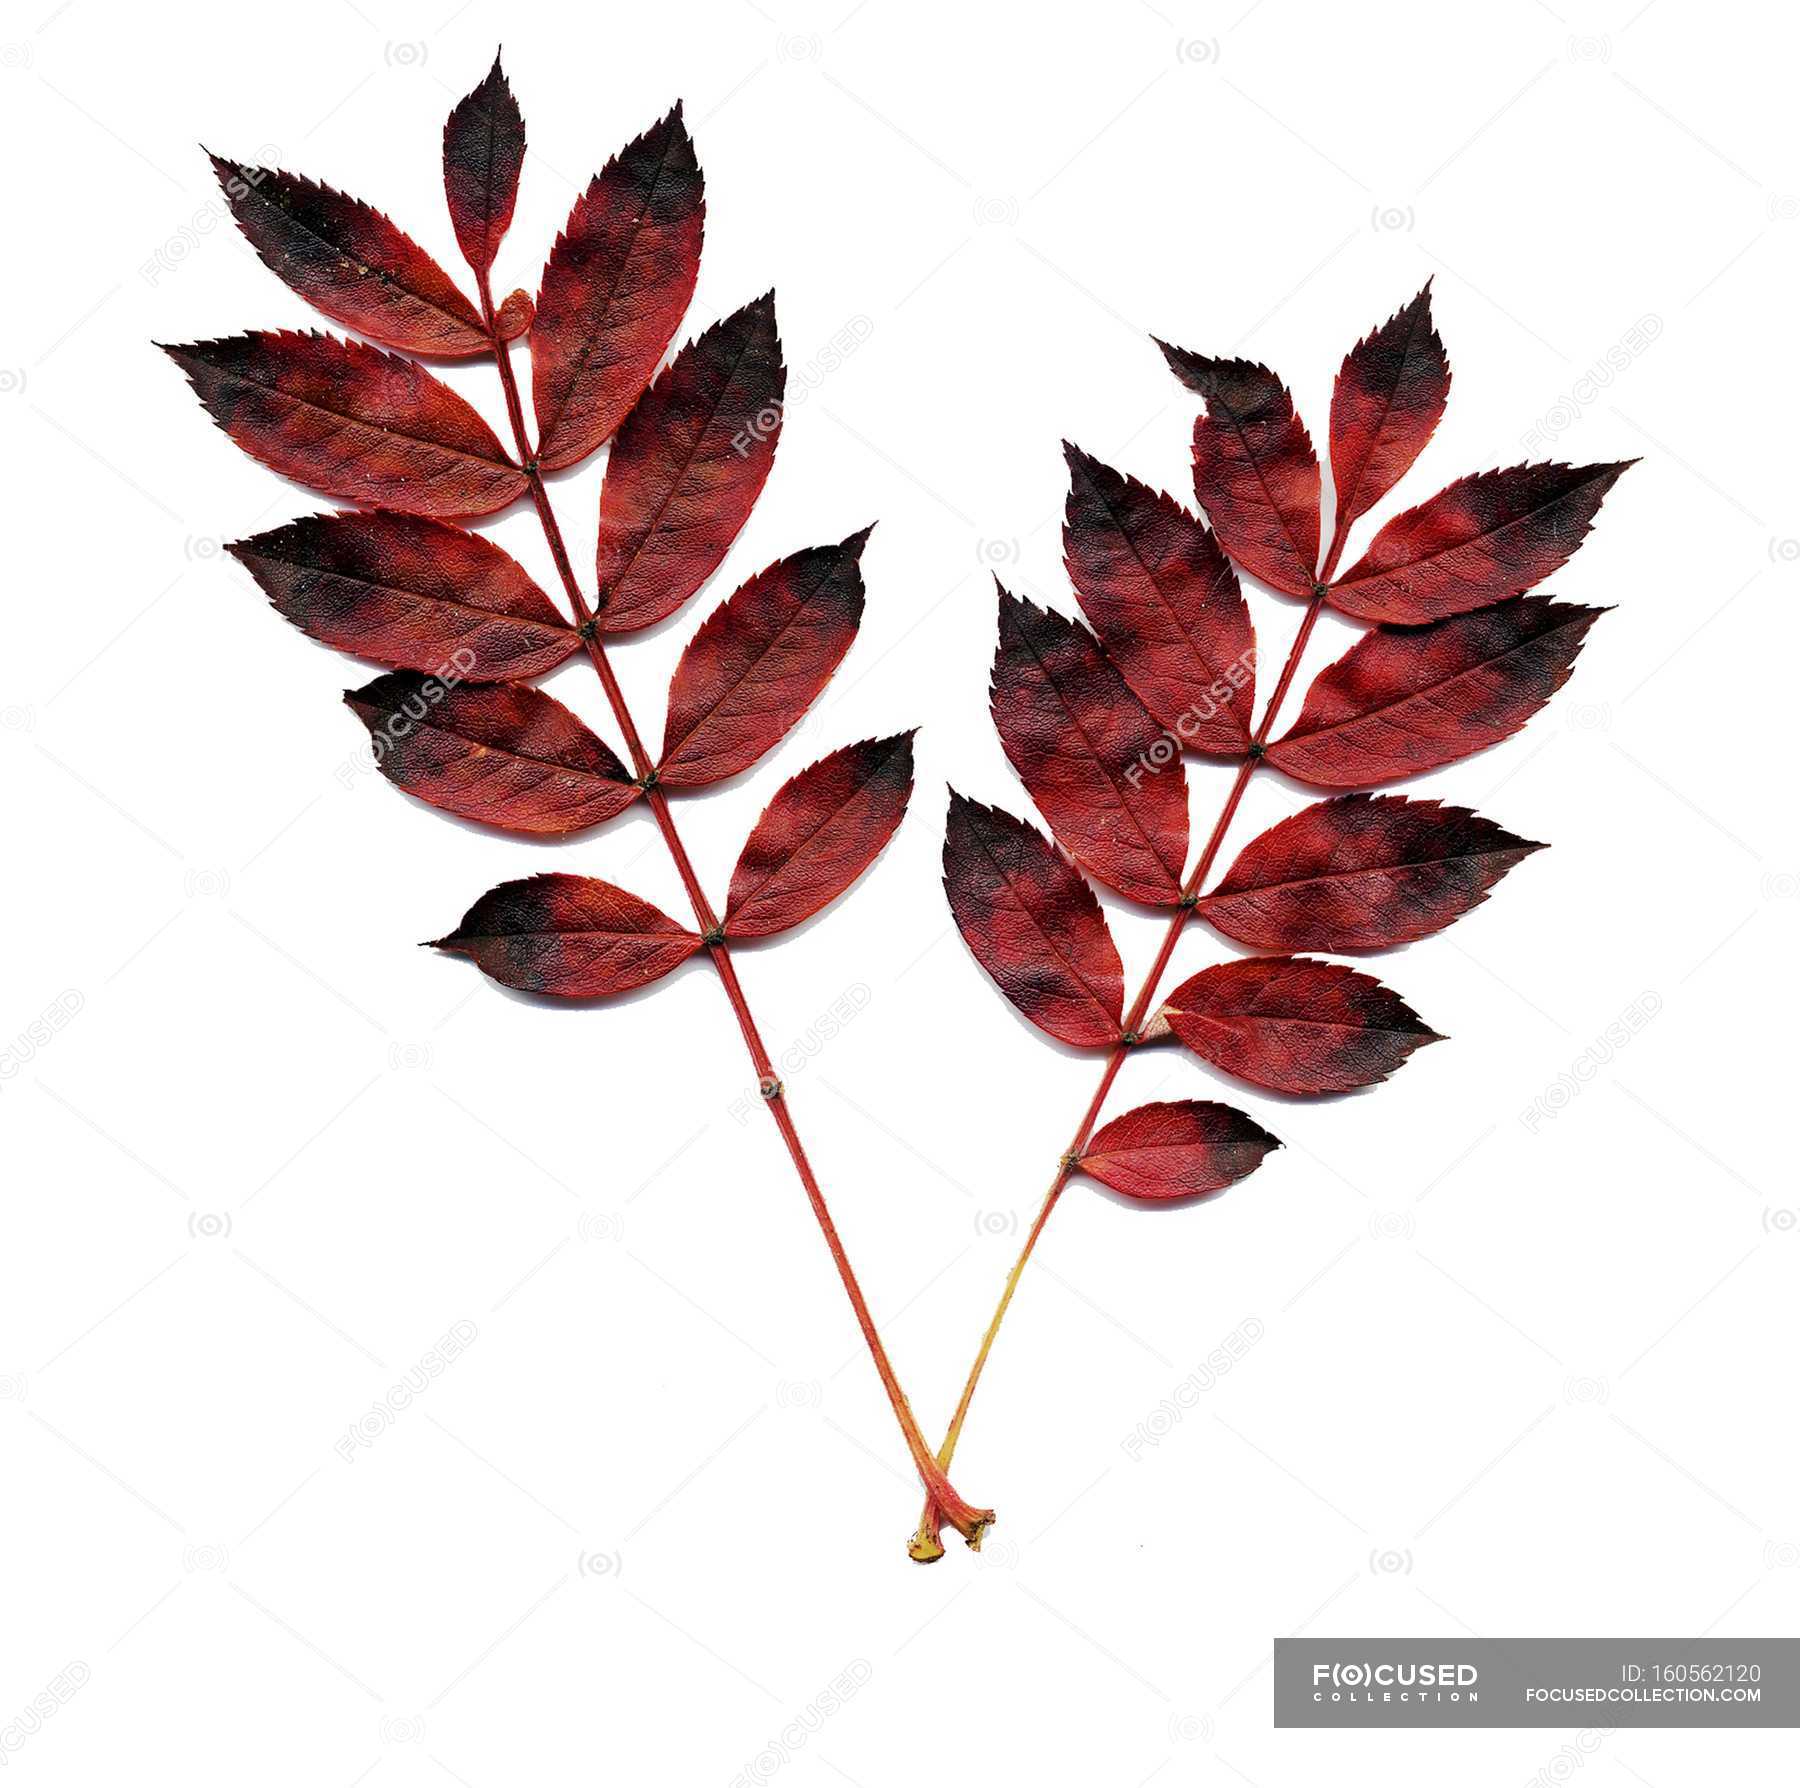 Autumn stems with leaves on white background. — tree leaves, nature - Stock  Photo | #160562120